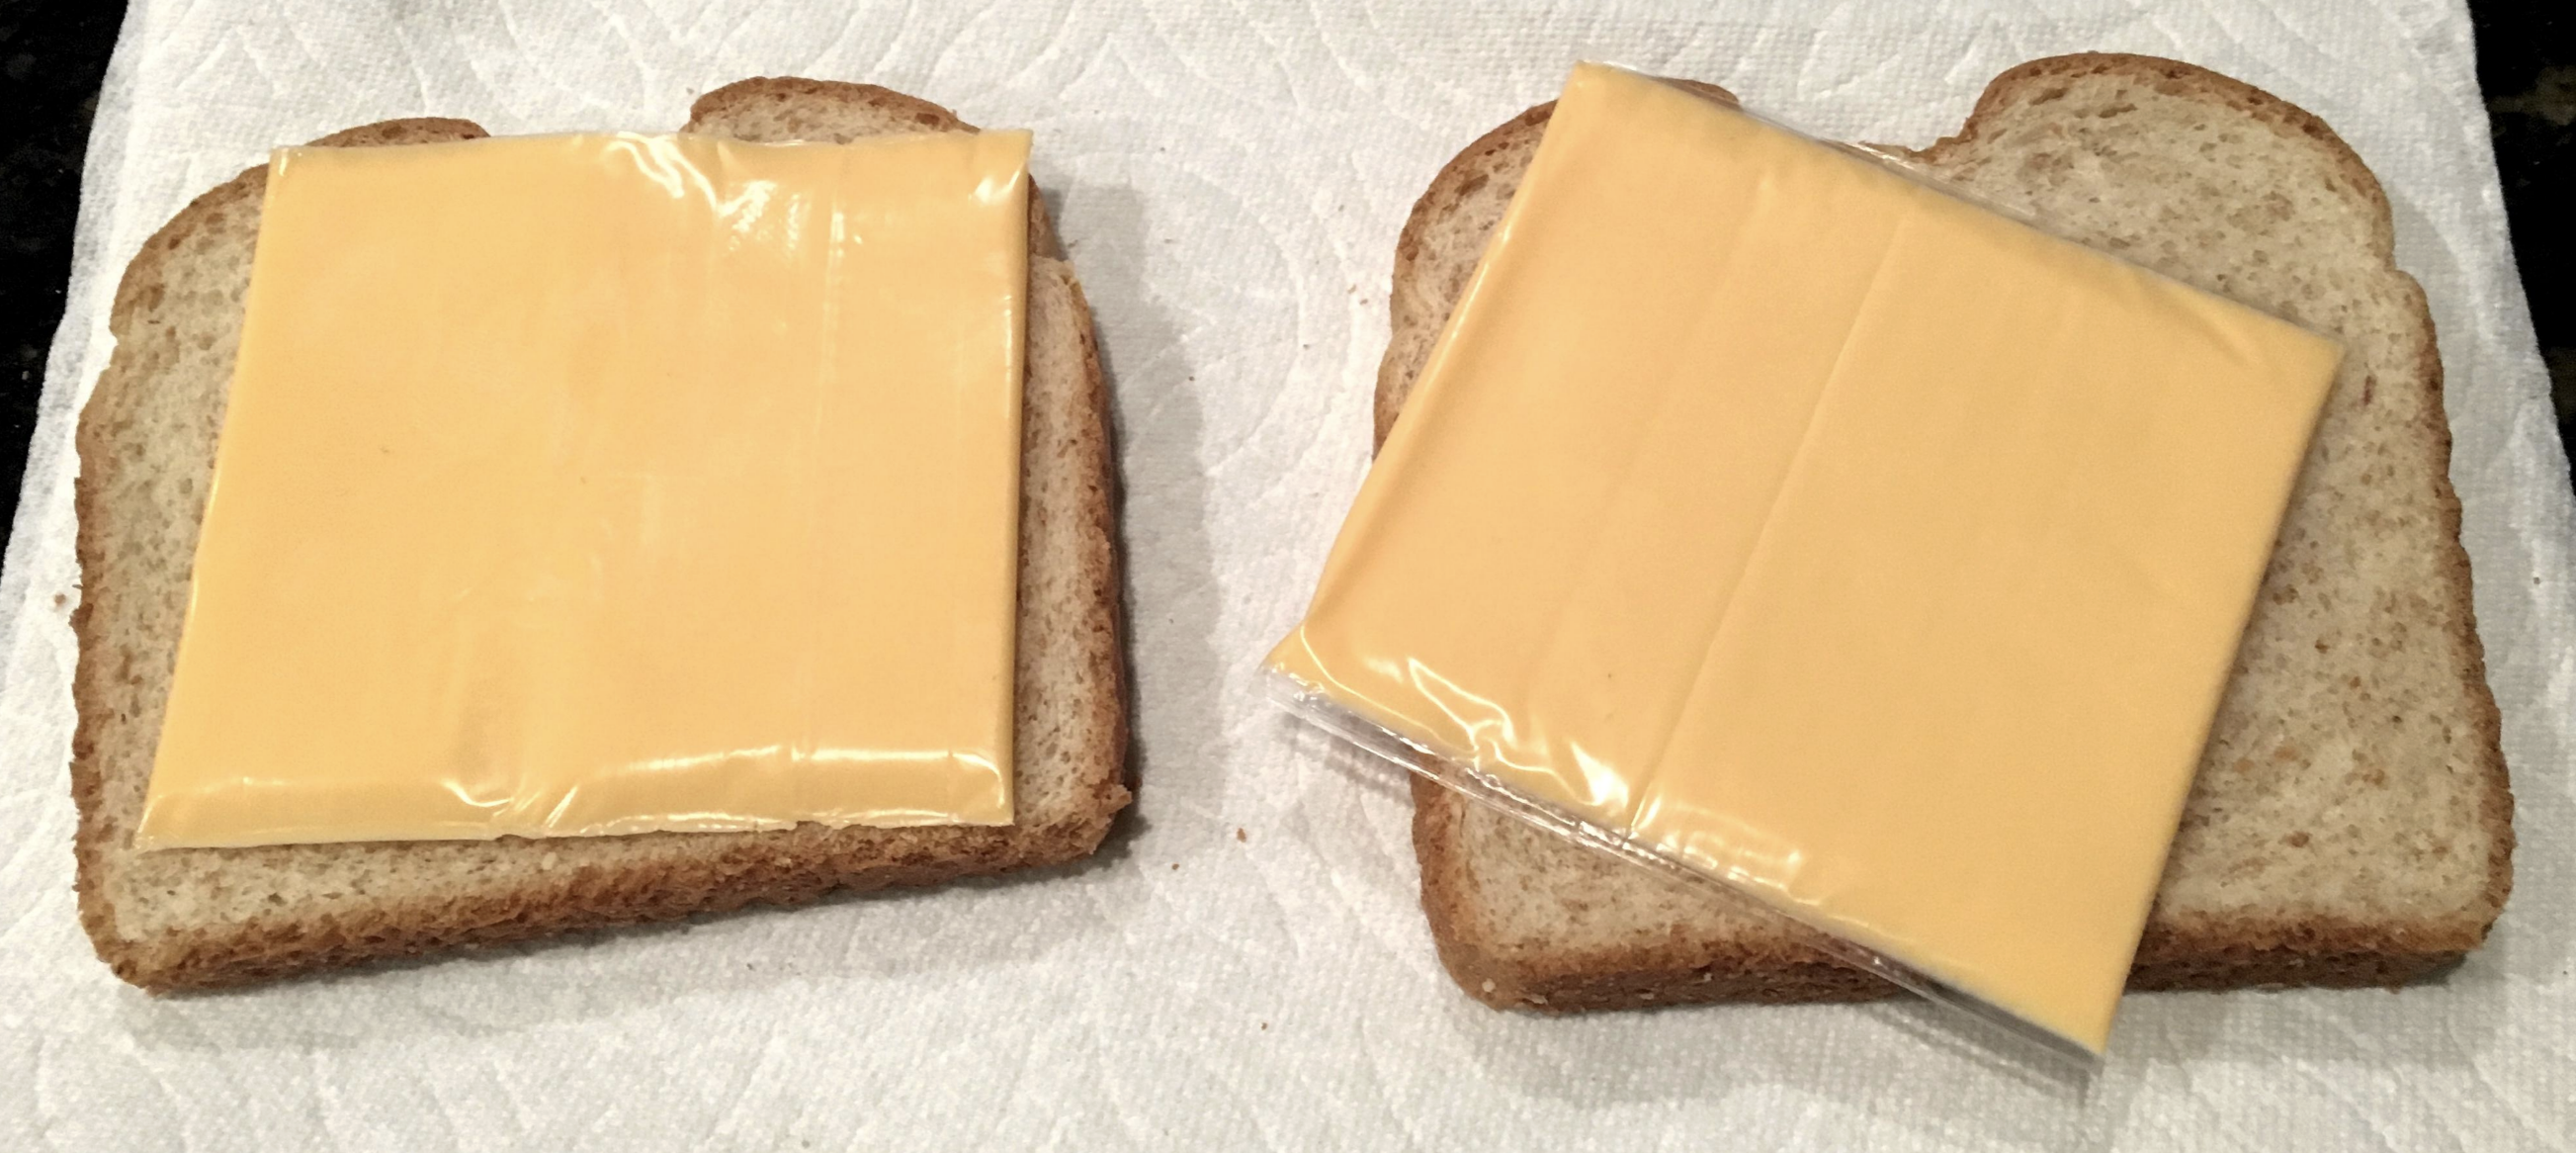 Two slices of bread with a single cheese slice on each, one with wrapper partially on